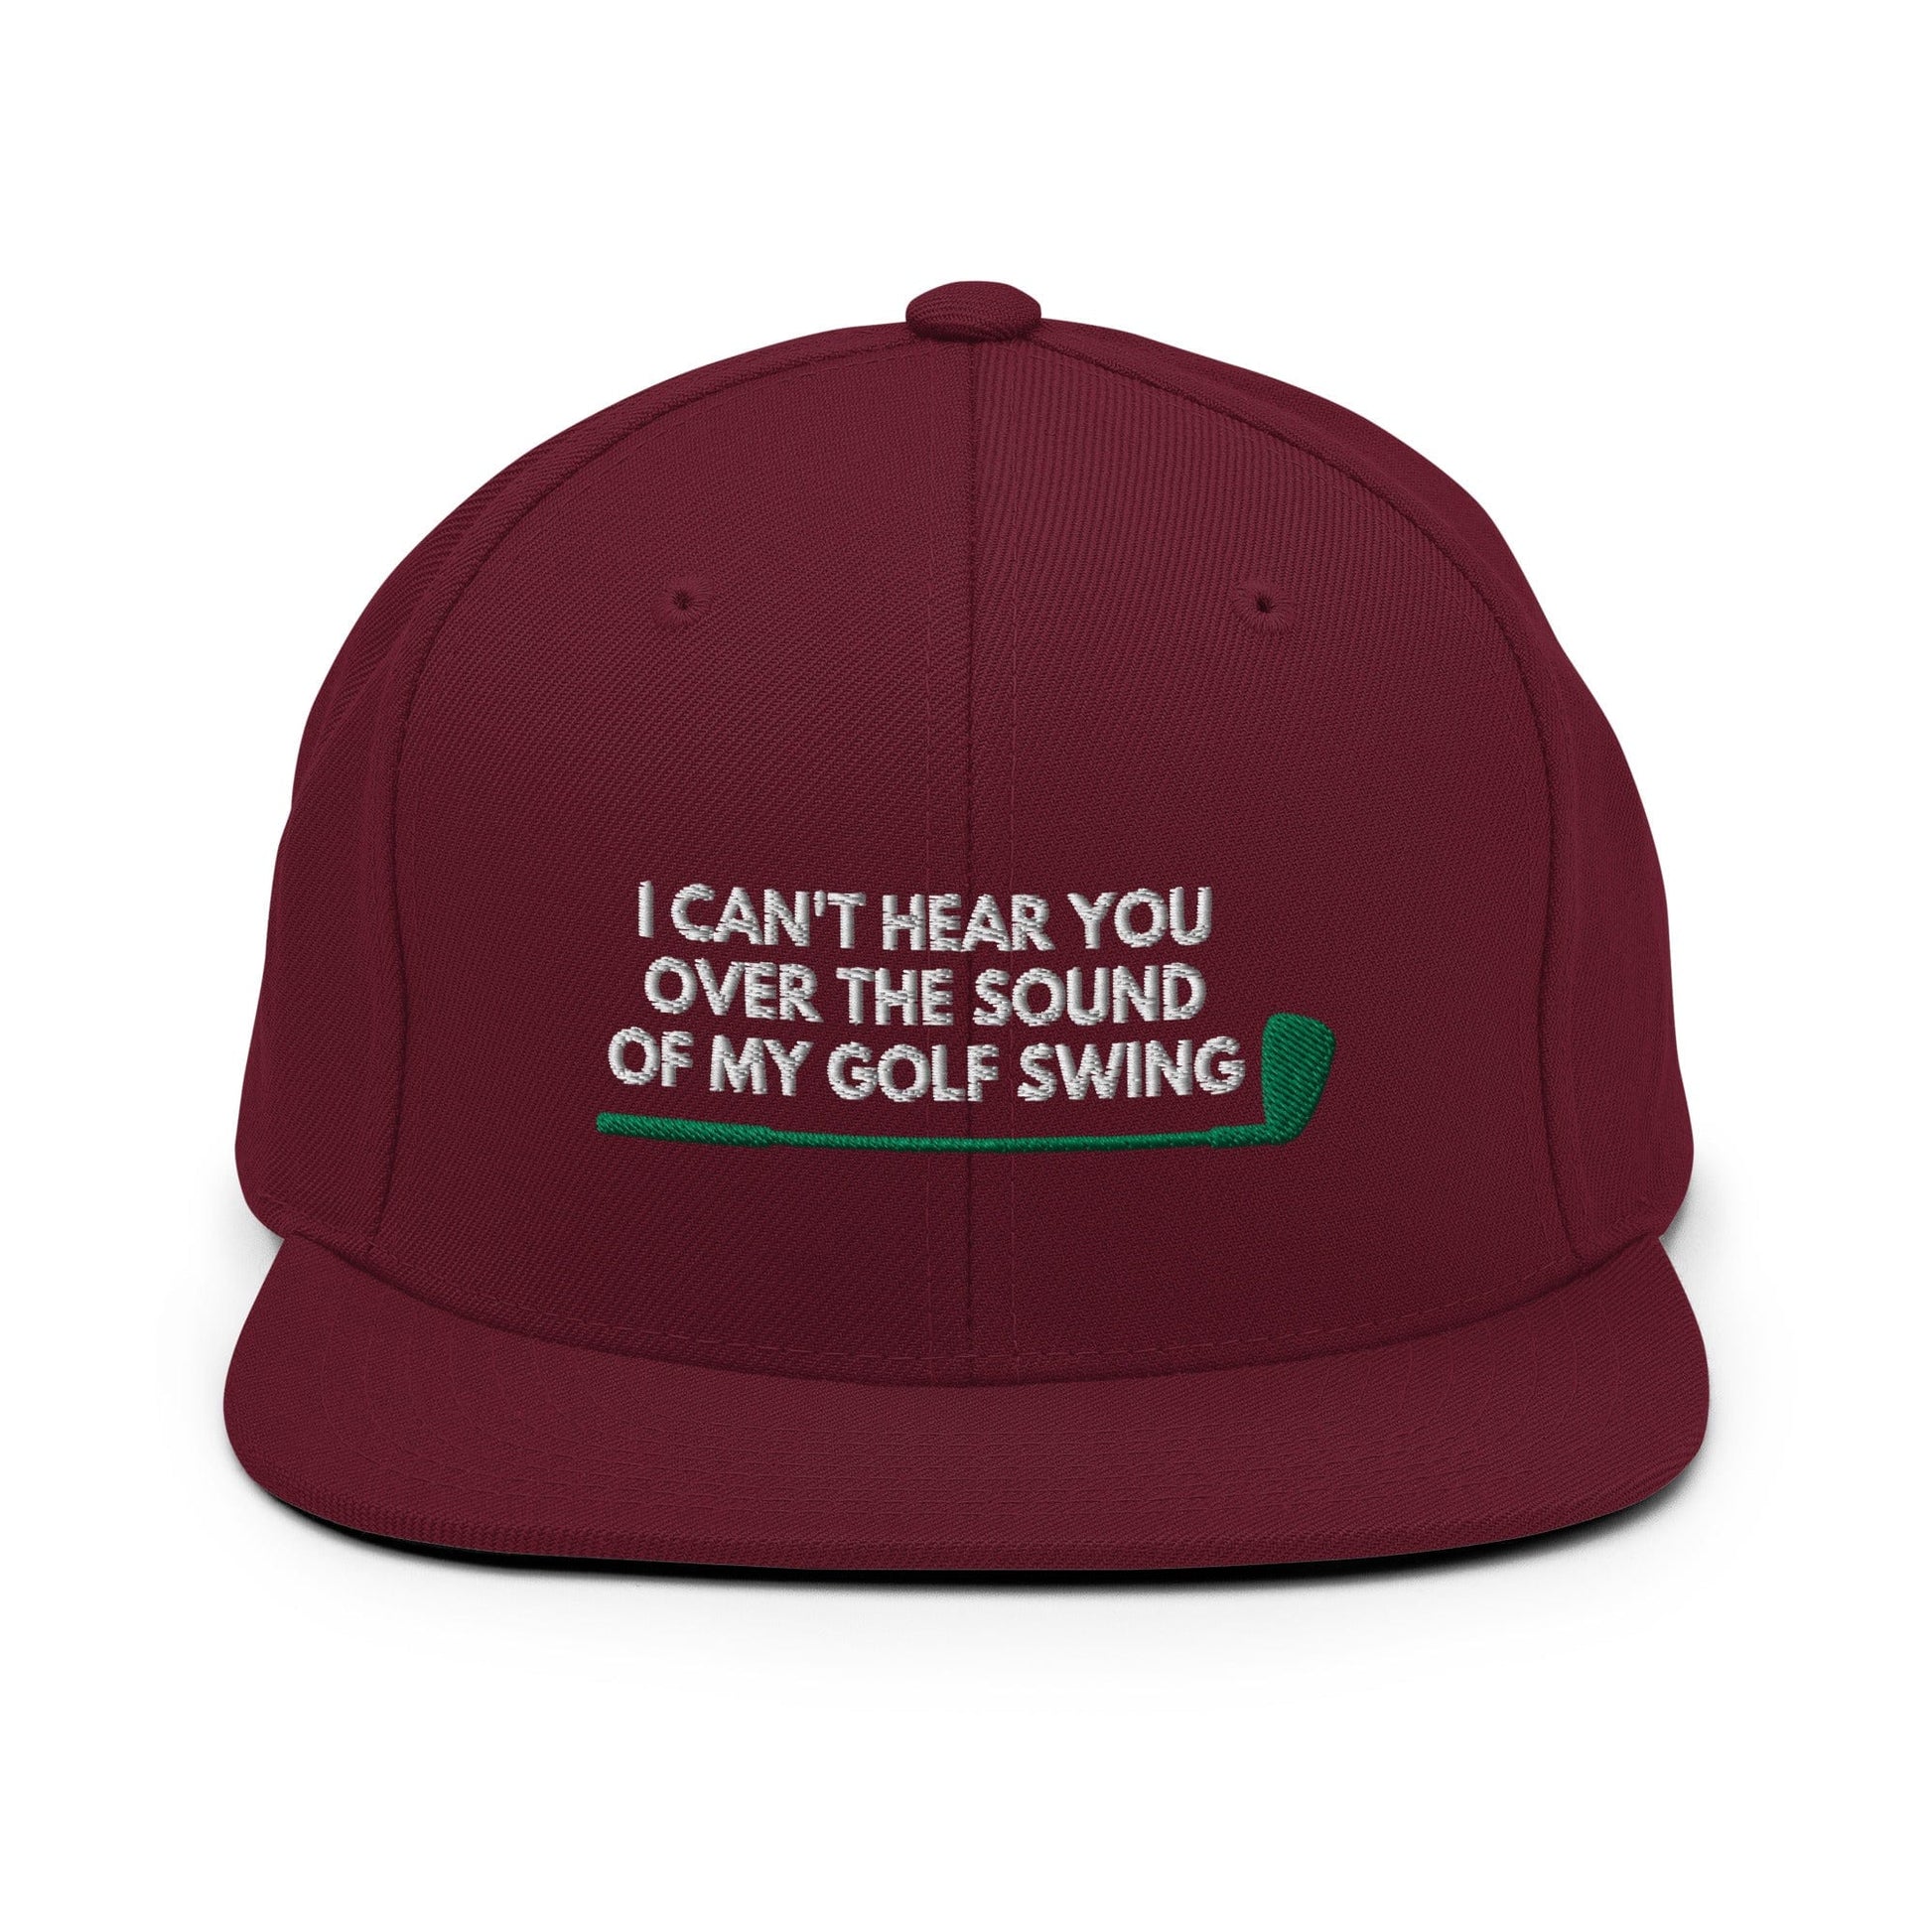 Funny Golfer Gifts  Snapback Hat Maroon I Cant Hear You Over The Sound Of My Golf Swing Hat Snapback Hat